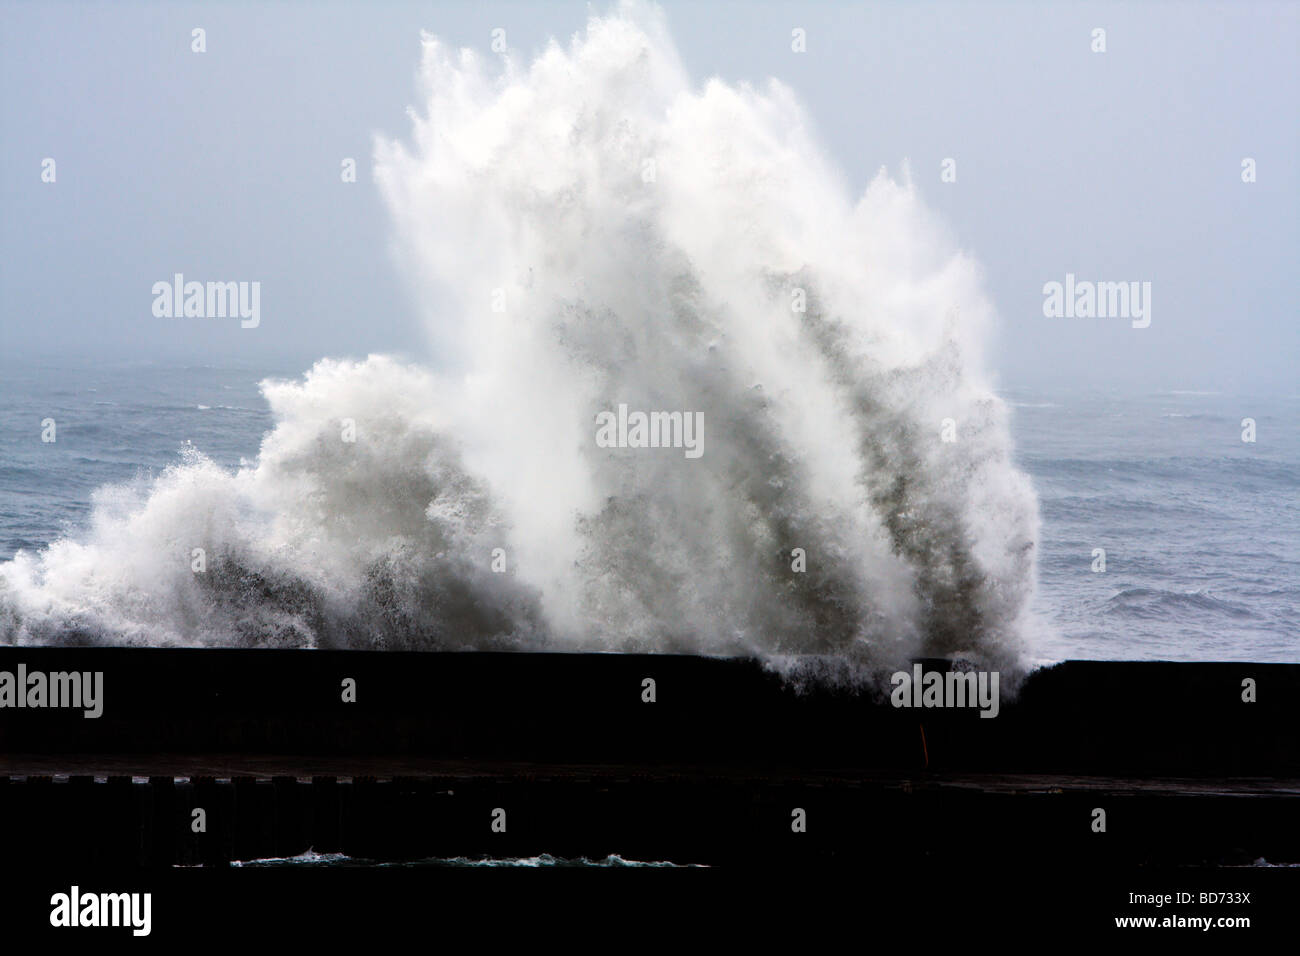 Typhoon Morakot sends large waves crashing into the breakwater wall at a port in Hualien City as it hits the east coast of Taiwan on Aug. 8, 2009 Stock Photo